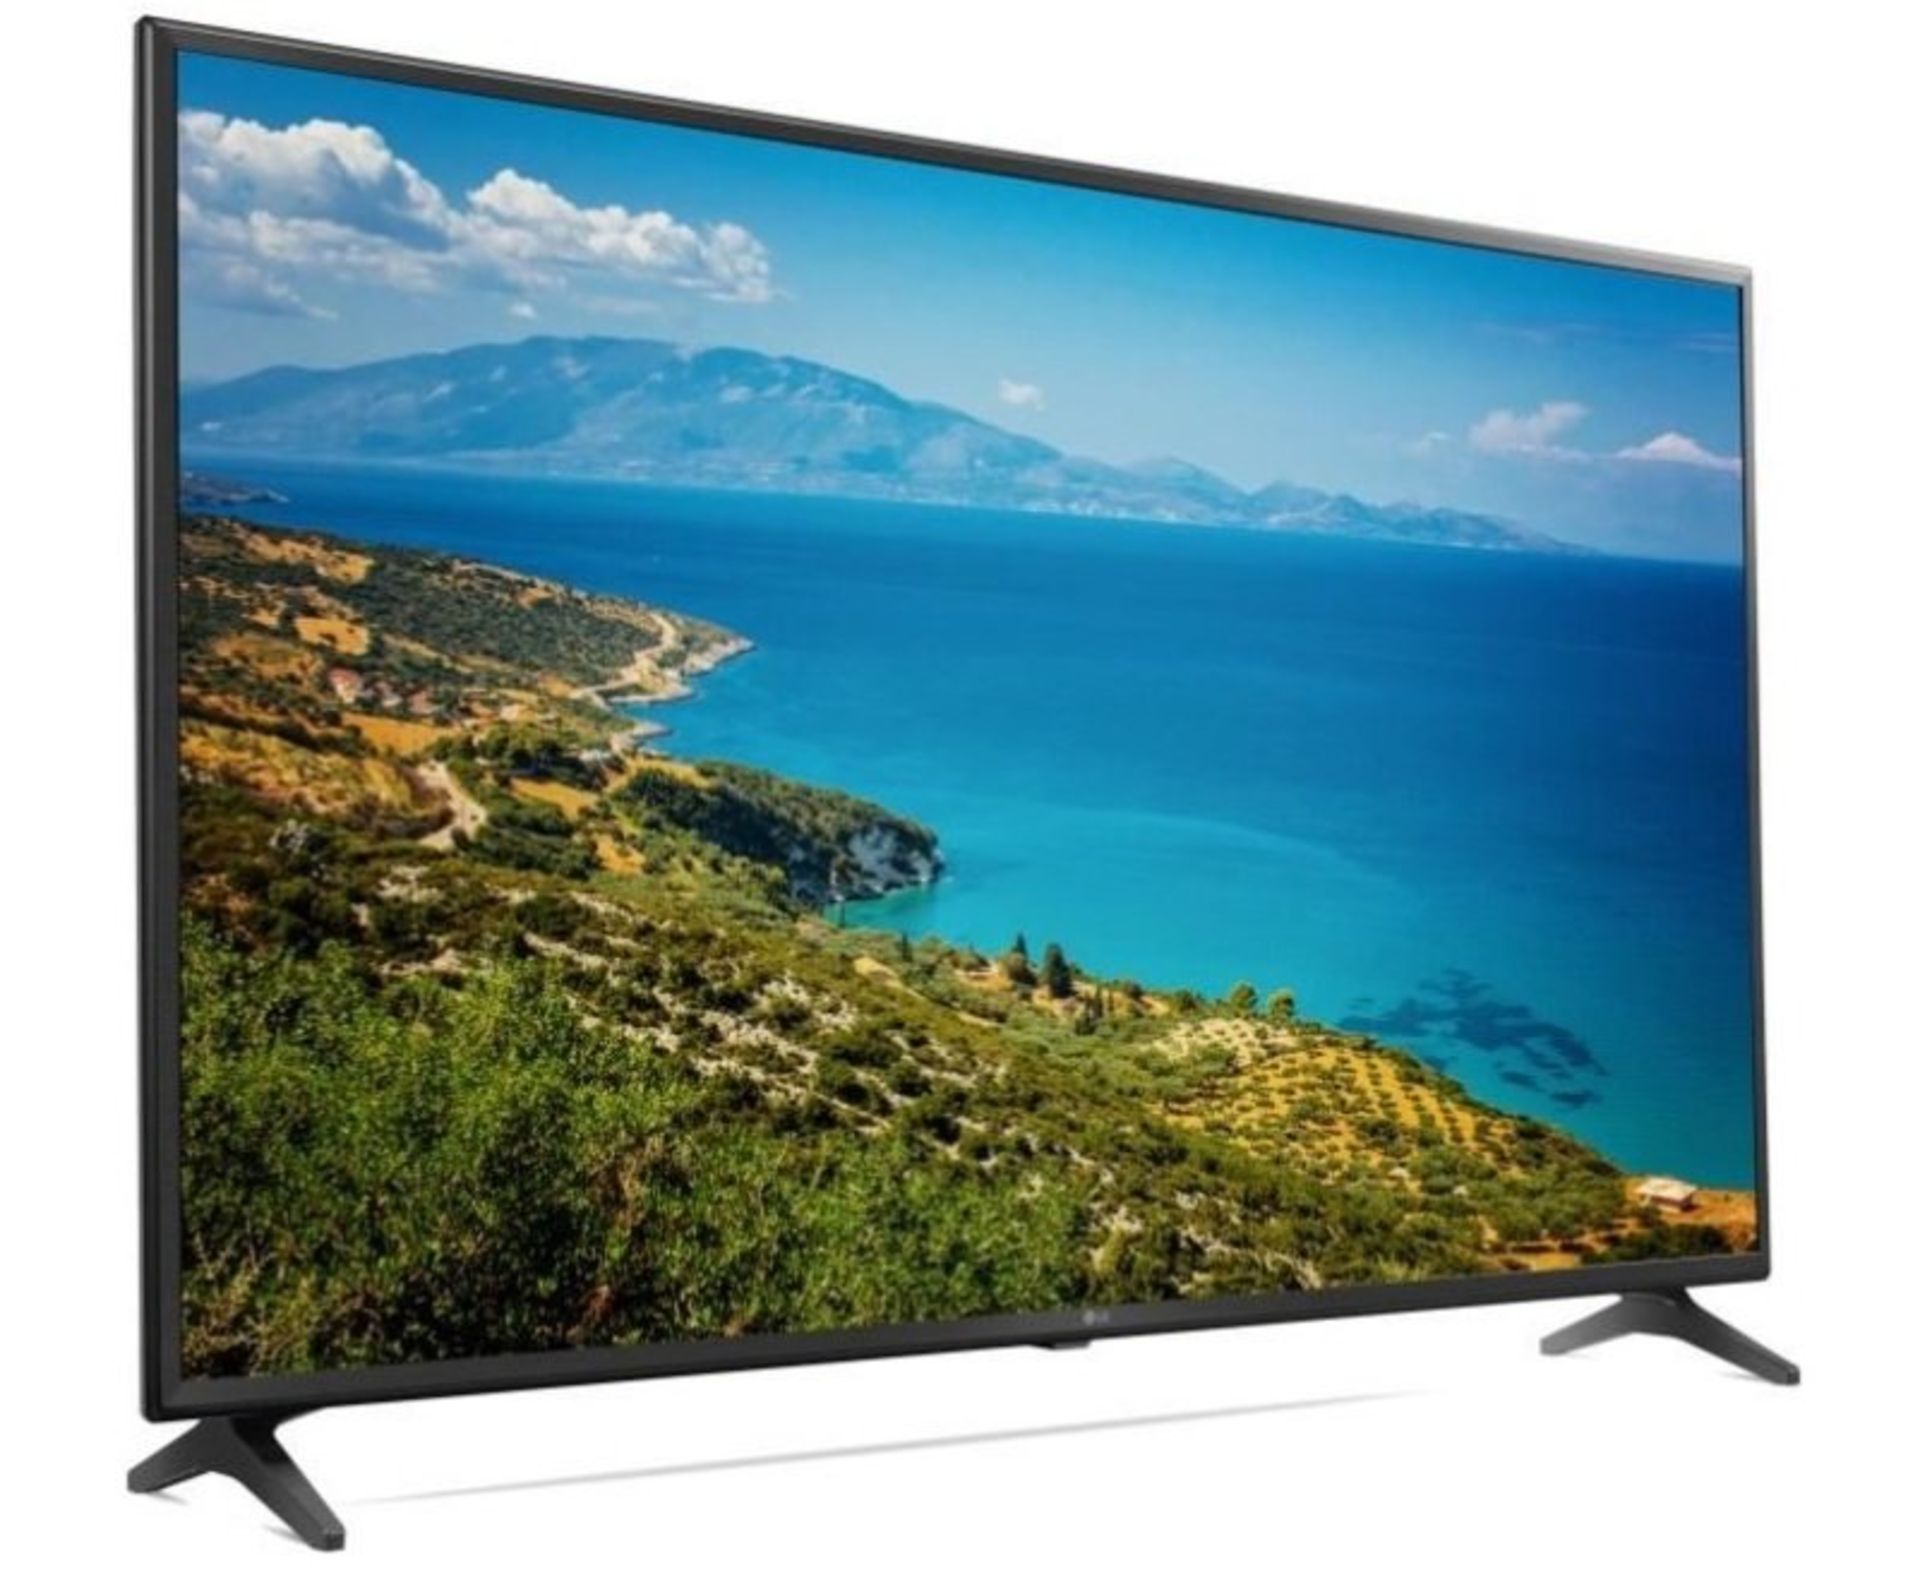 V Grade A LG 43 Inch ACTIVE HDR 4K ULTRA HD LED SMART TV WITH FREEVIEW HD & WEBOS 4.0 & WIFI - AI TV - Image 2 of 2